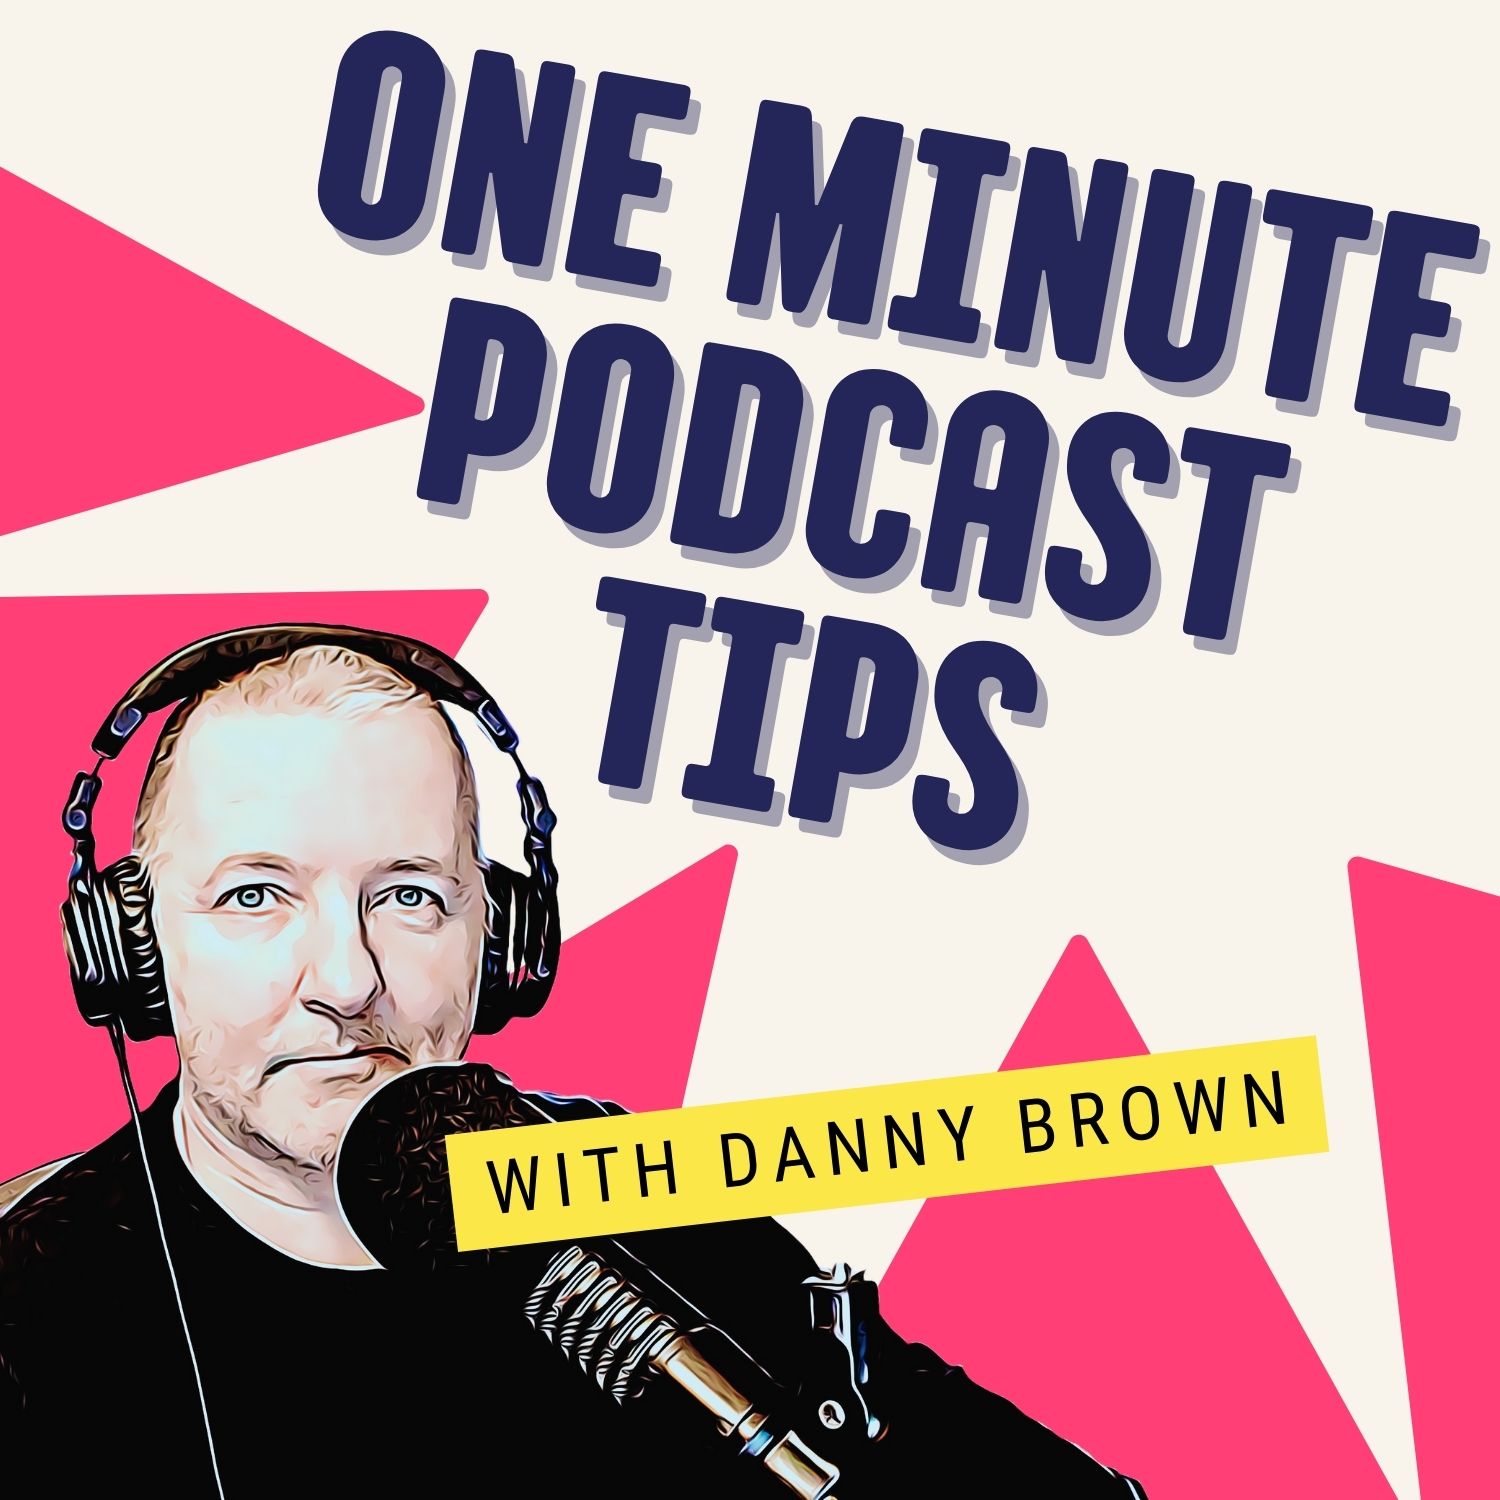 One Minute Podcast Tips's artwork